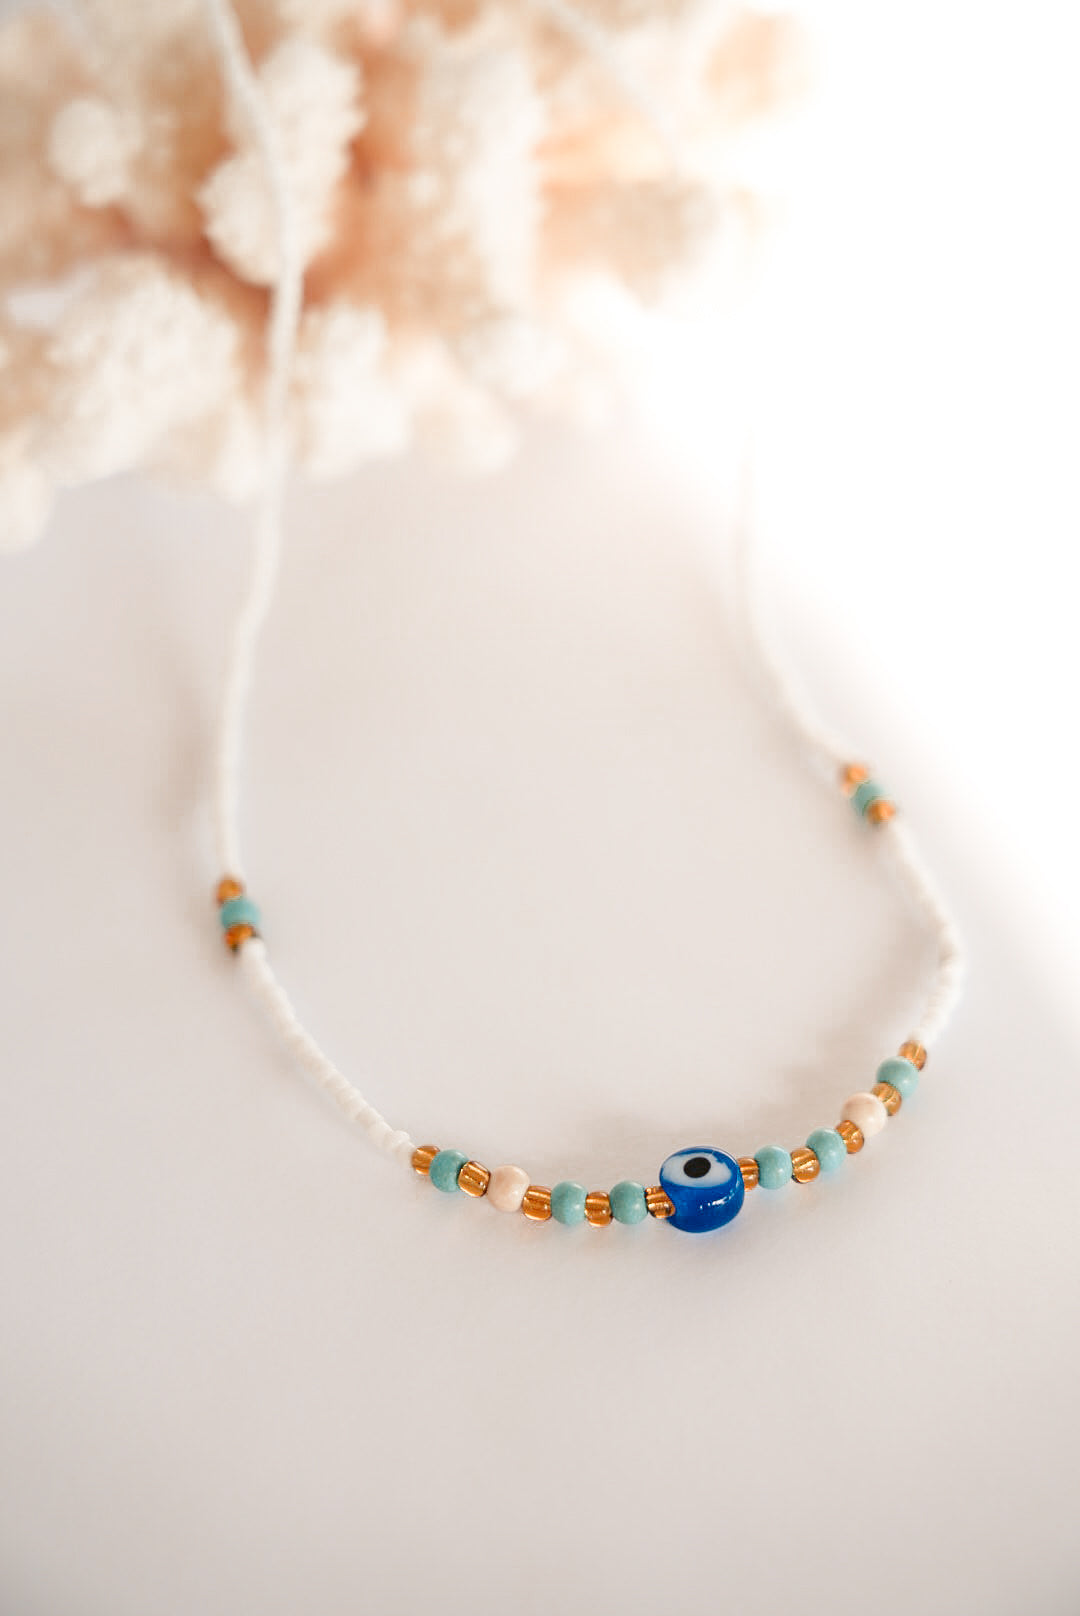 THE EYE BEADED NECKLACE